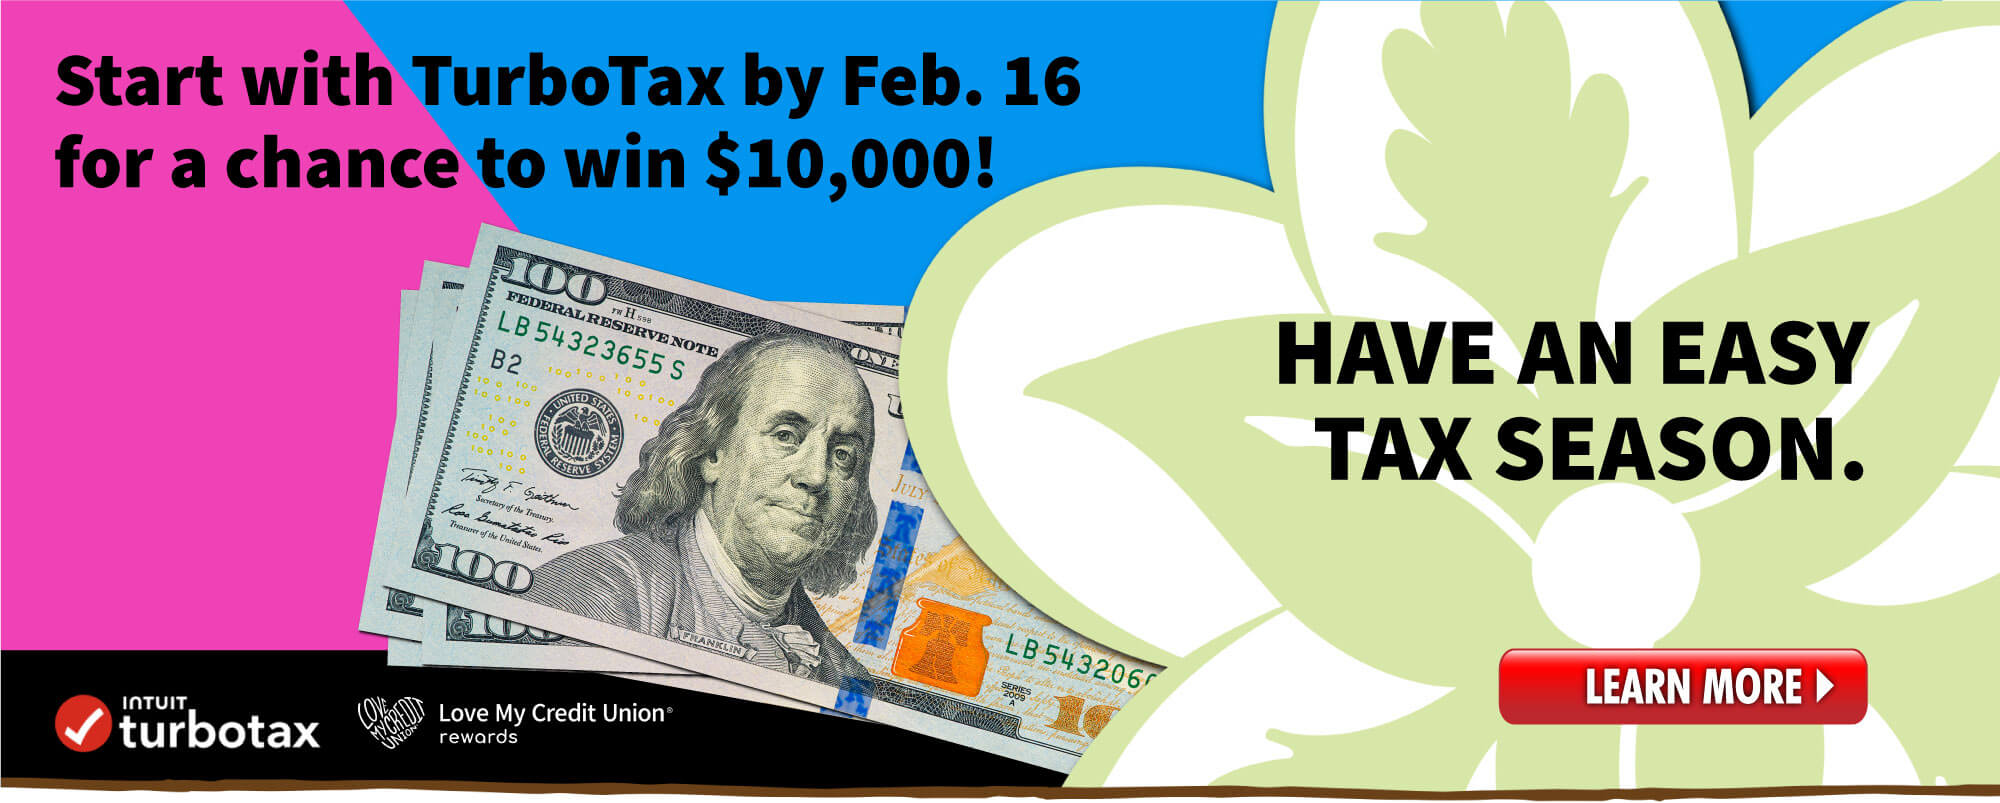 Have an easy season. Start with TurboTax by February 16 for a chance to win $10,000! Learn More